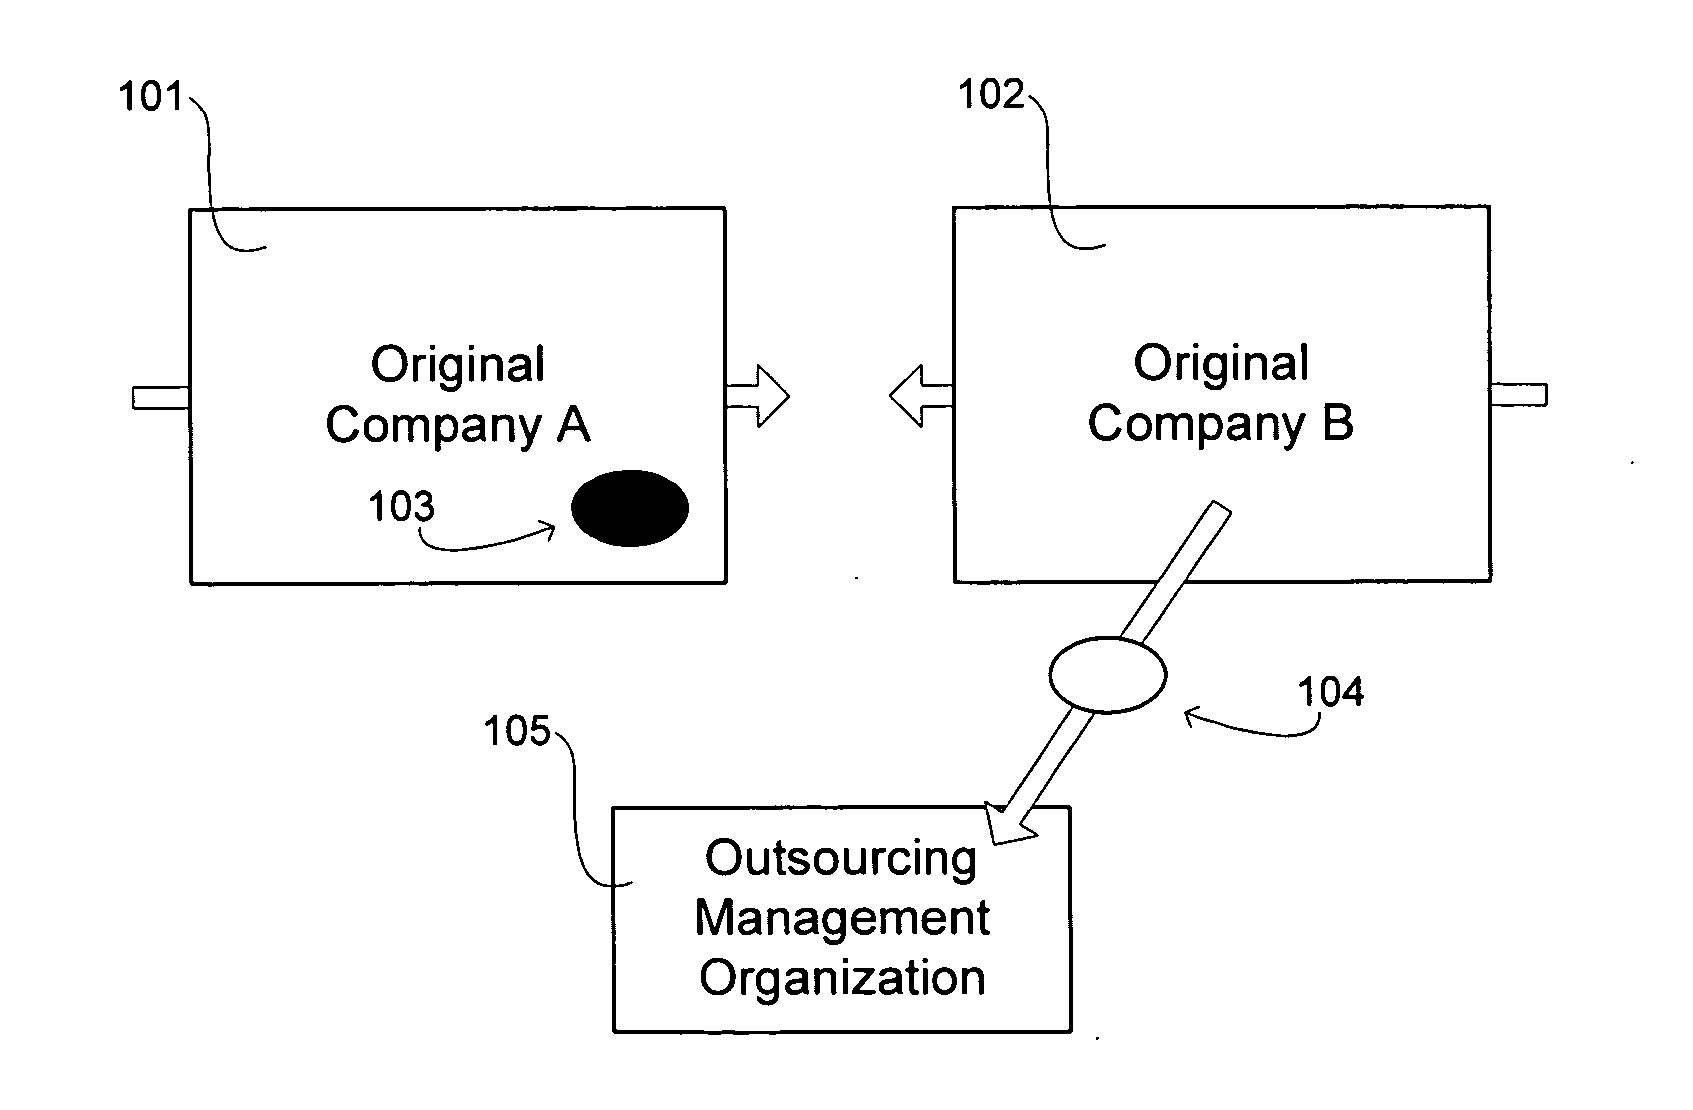 Transformation of organizational structures and operations through outsourcing integration of mergers and acquisitions